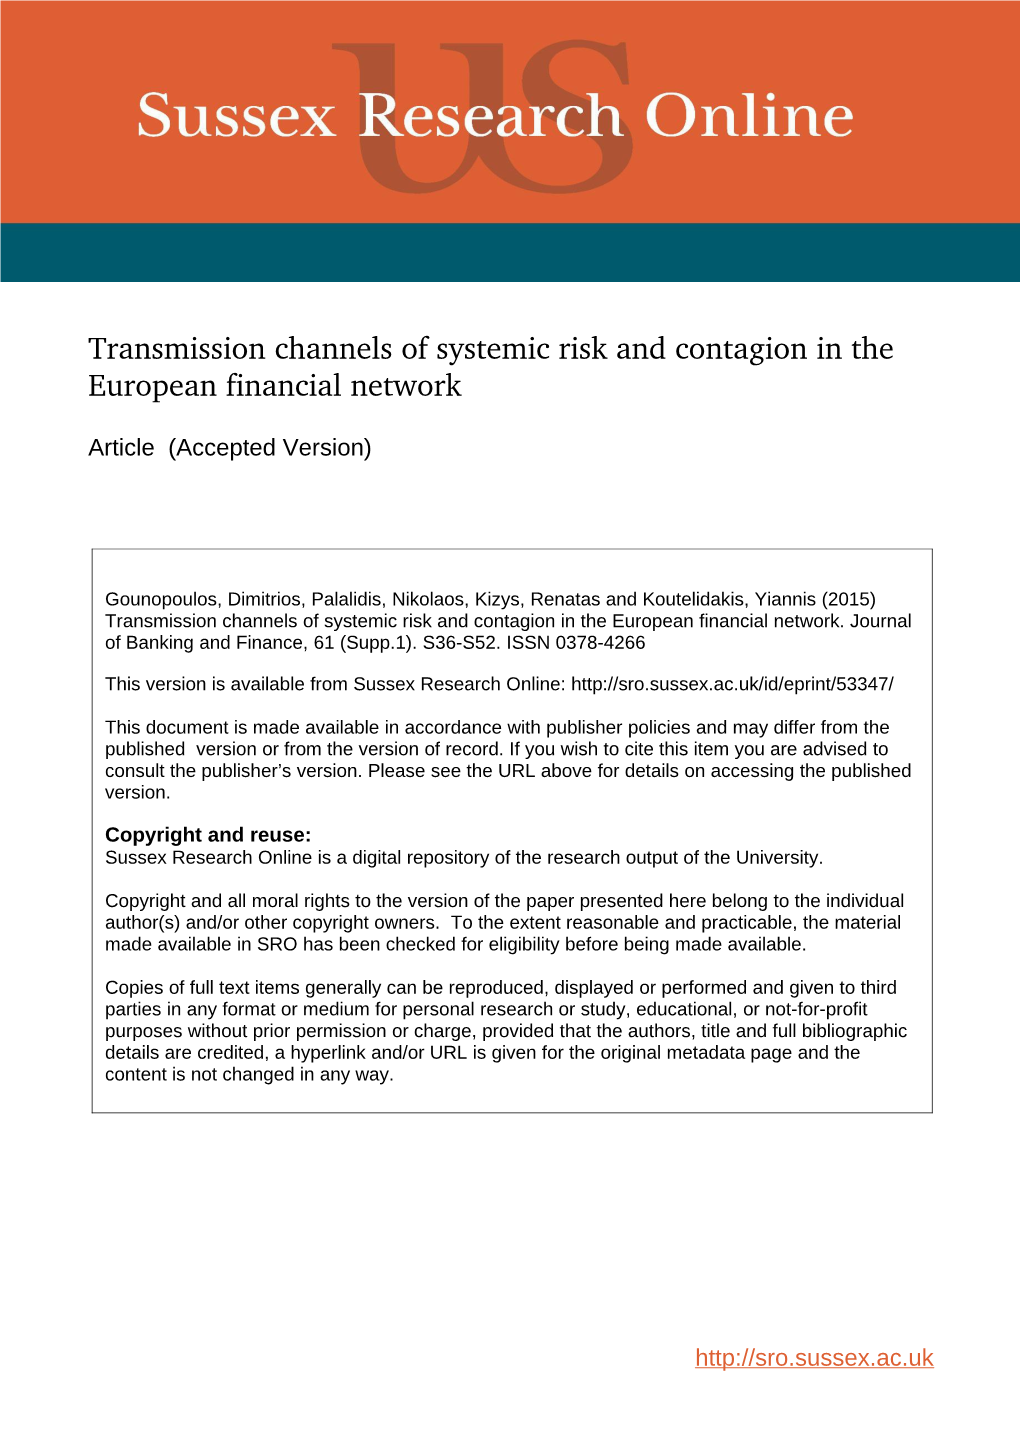 Transmission Channels of Systemic Risk and Contagion in the European Financial Network